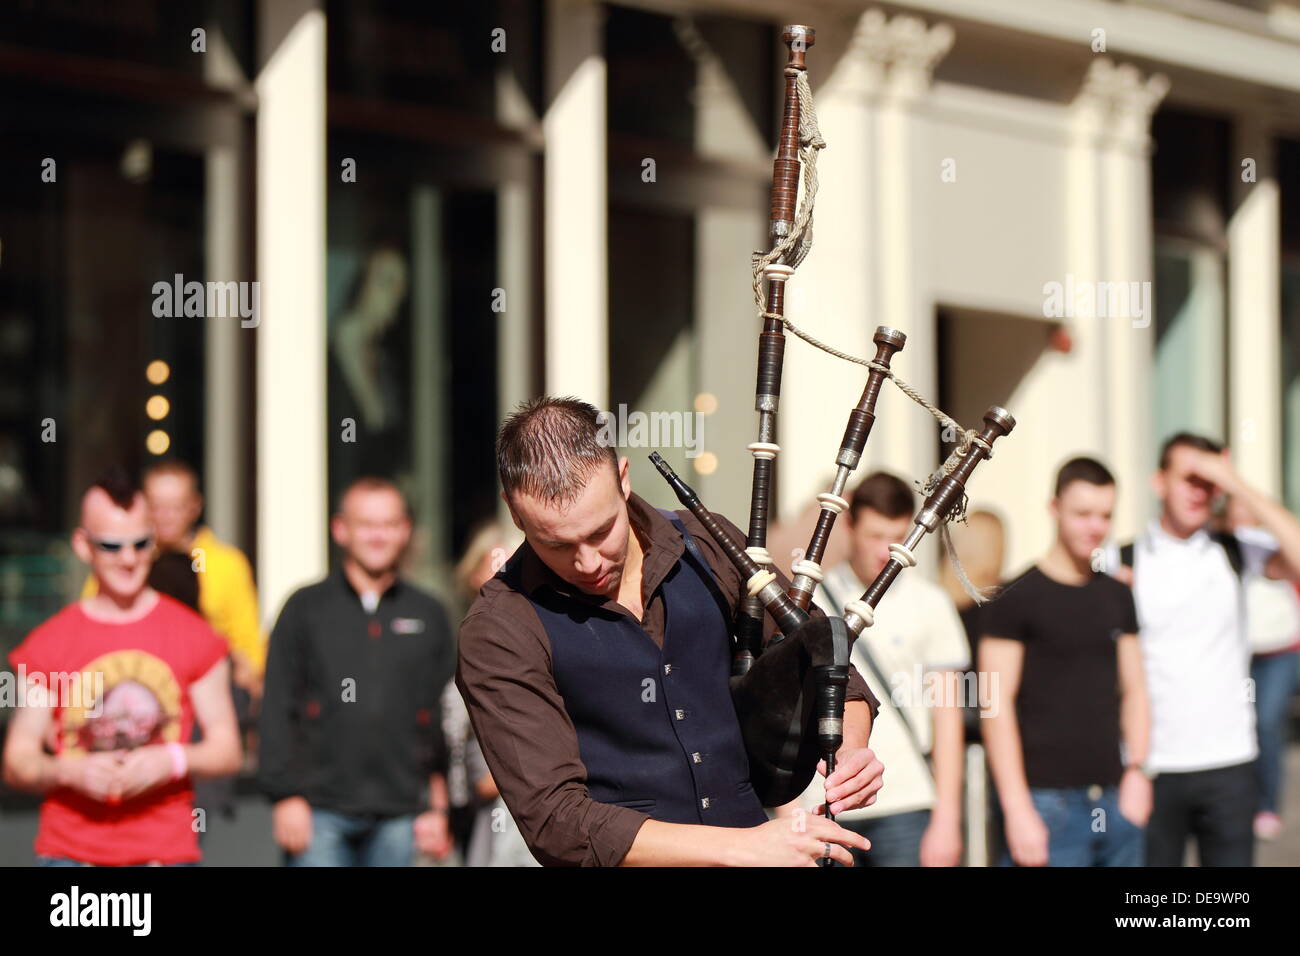 A bagpiper entertains shoppers in Buchanan Street, Glasgow, Scotland, UK music, show people. Stock Photo